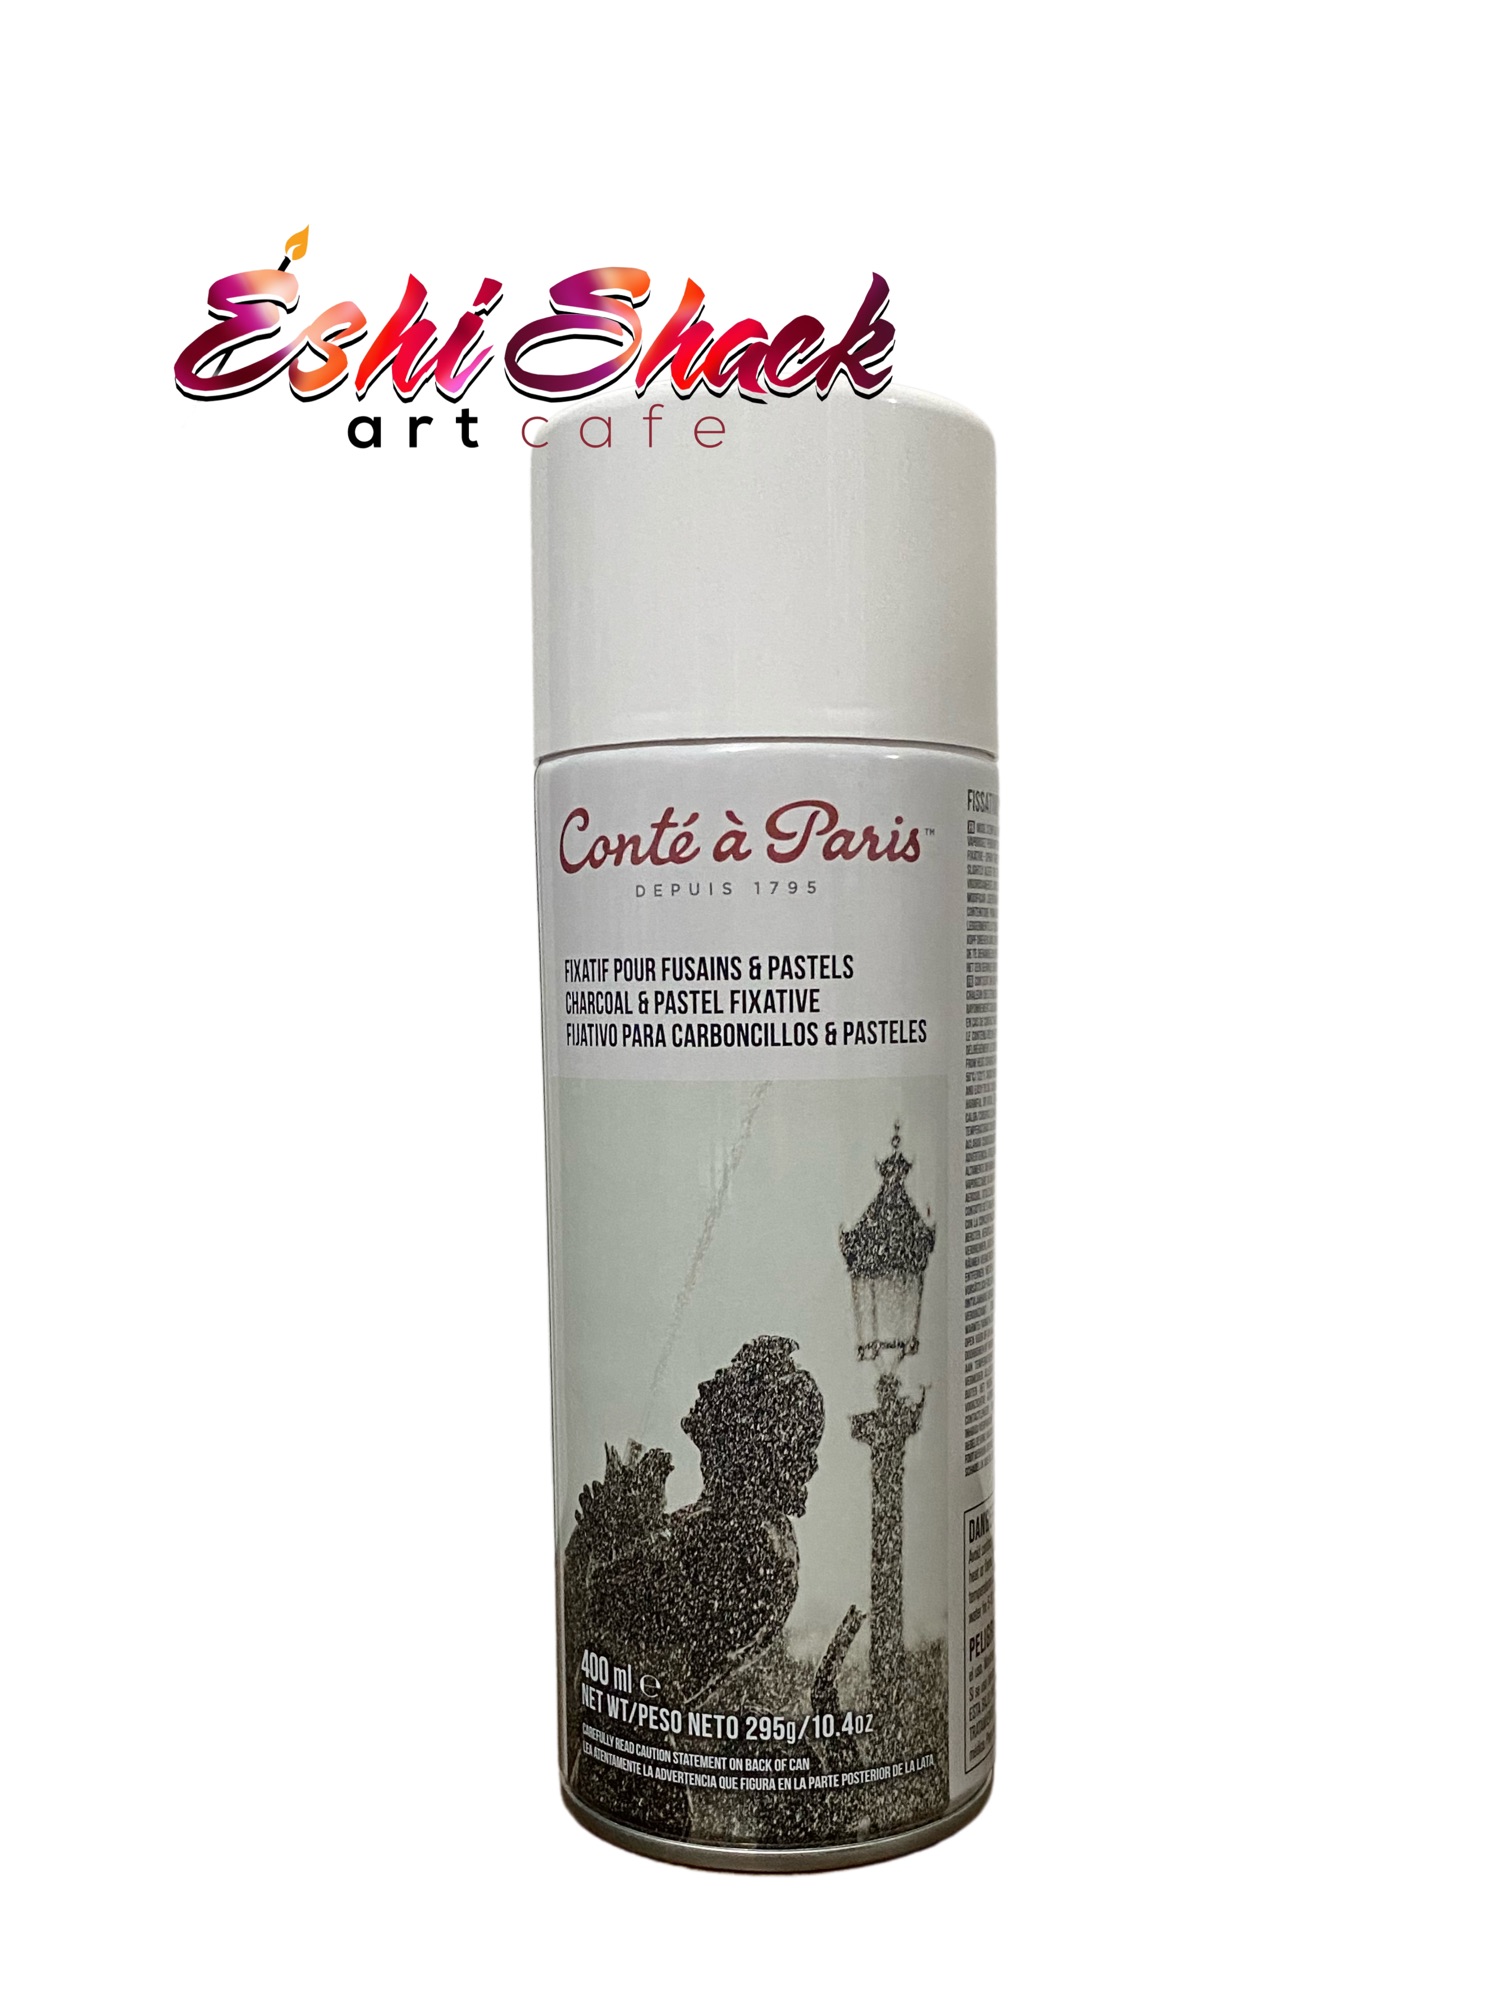 Conte-a-Paris Charcoal and Pastel Fixative Spray 400ml